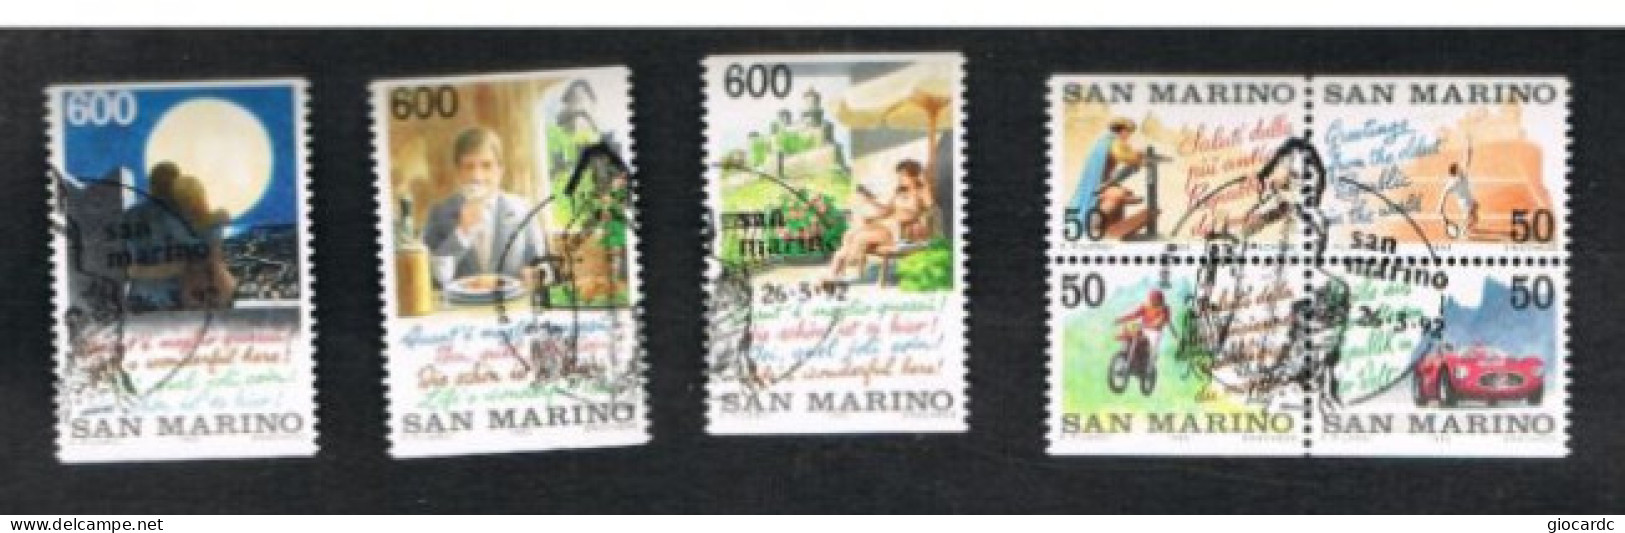 SAN MARINO - UN 1344.1350 - 1992 SITI TURISTICI DI SAN MARINO (COMPLET SET OF 7 STAMPS,4 SE-TENANT - BY BOOKLET)  - USED - Gebraucht